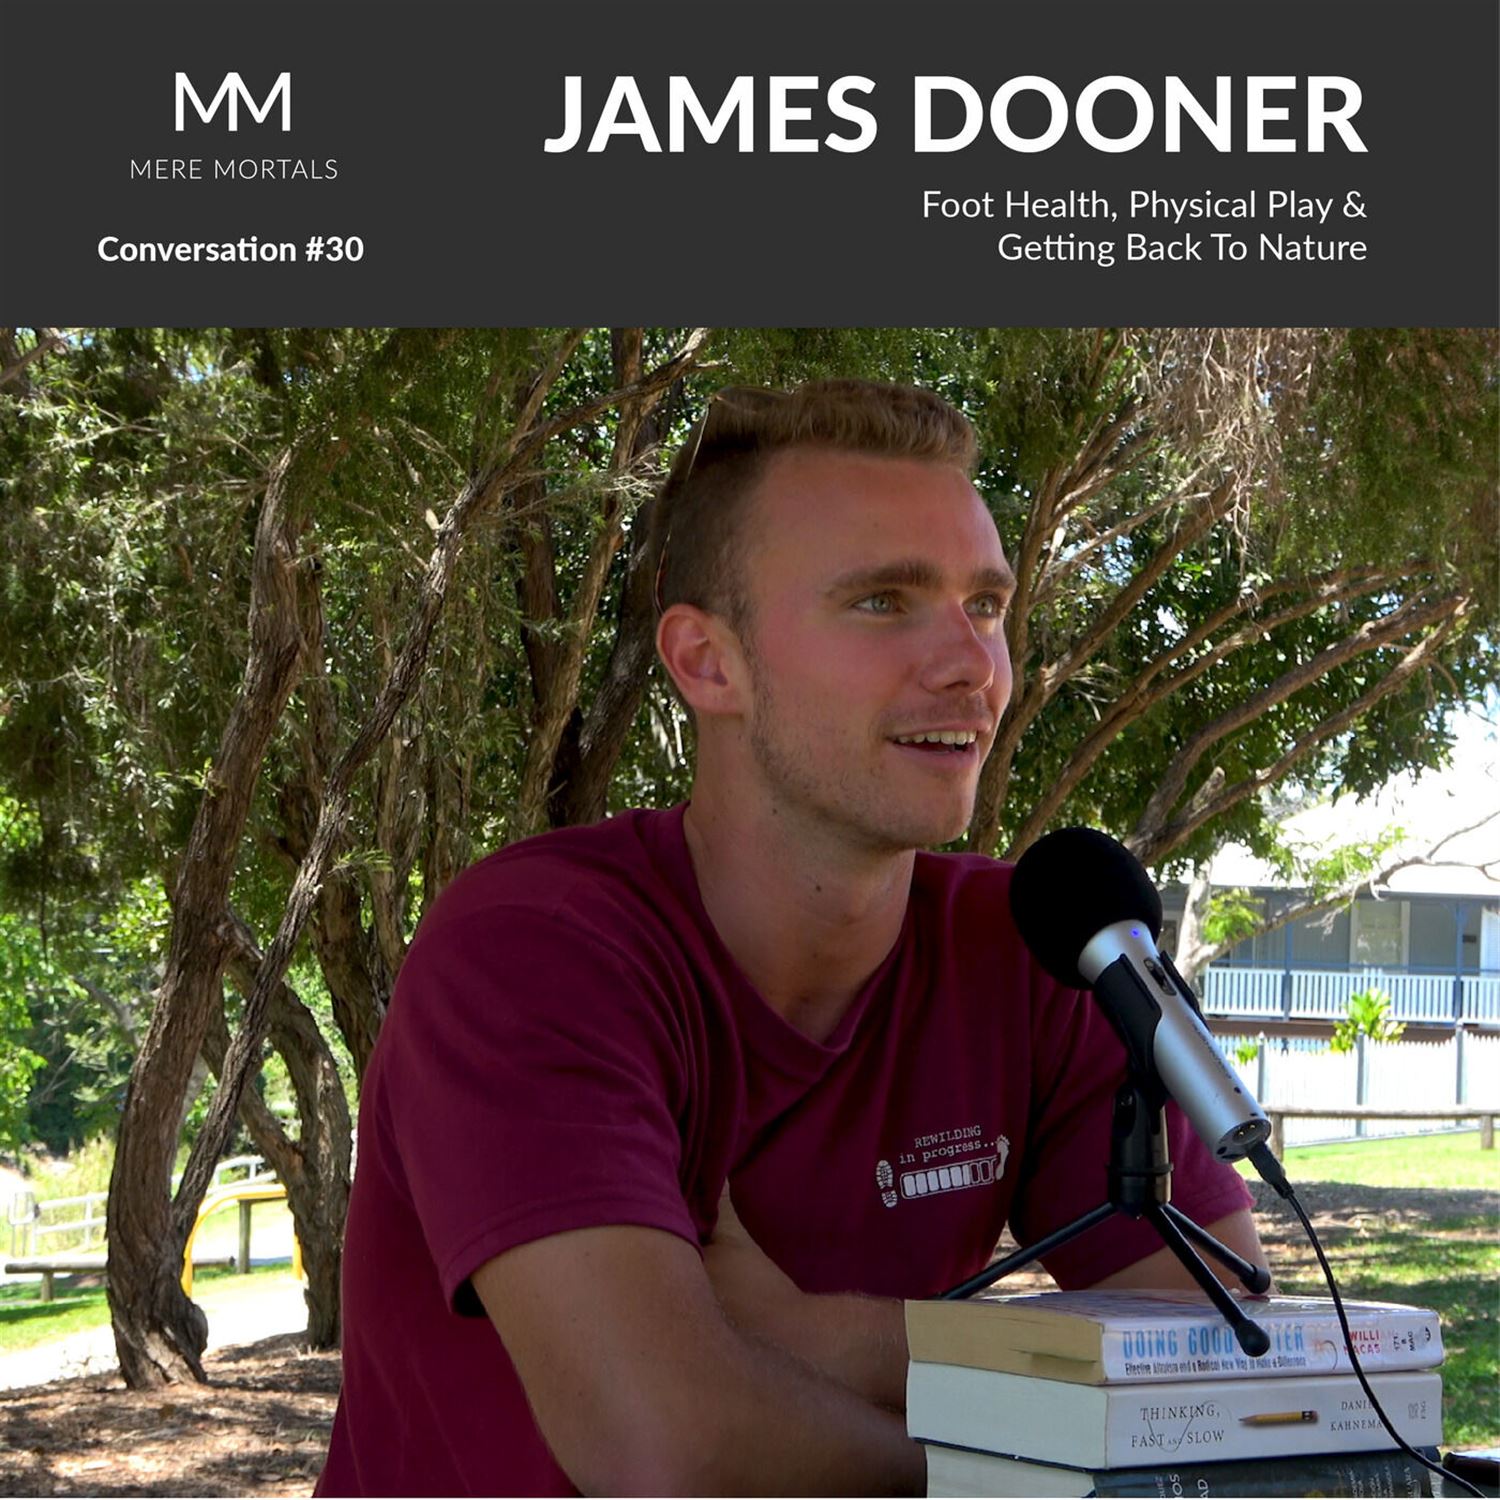 JAMES DOONER | Foot Health, Physical Play & Getting Back To Nature: Mere Mortals Conversation #30